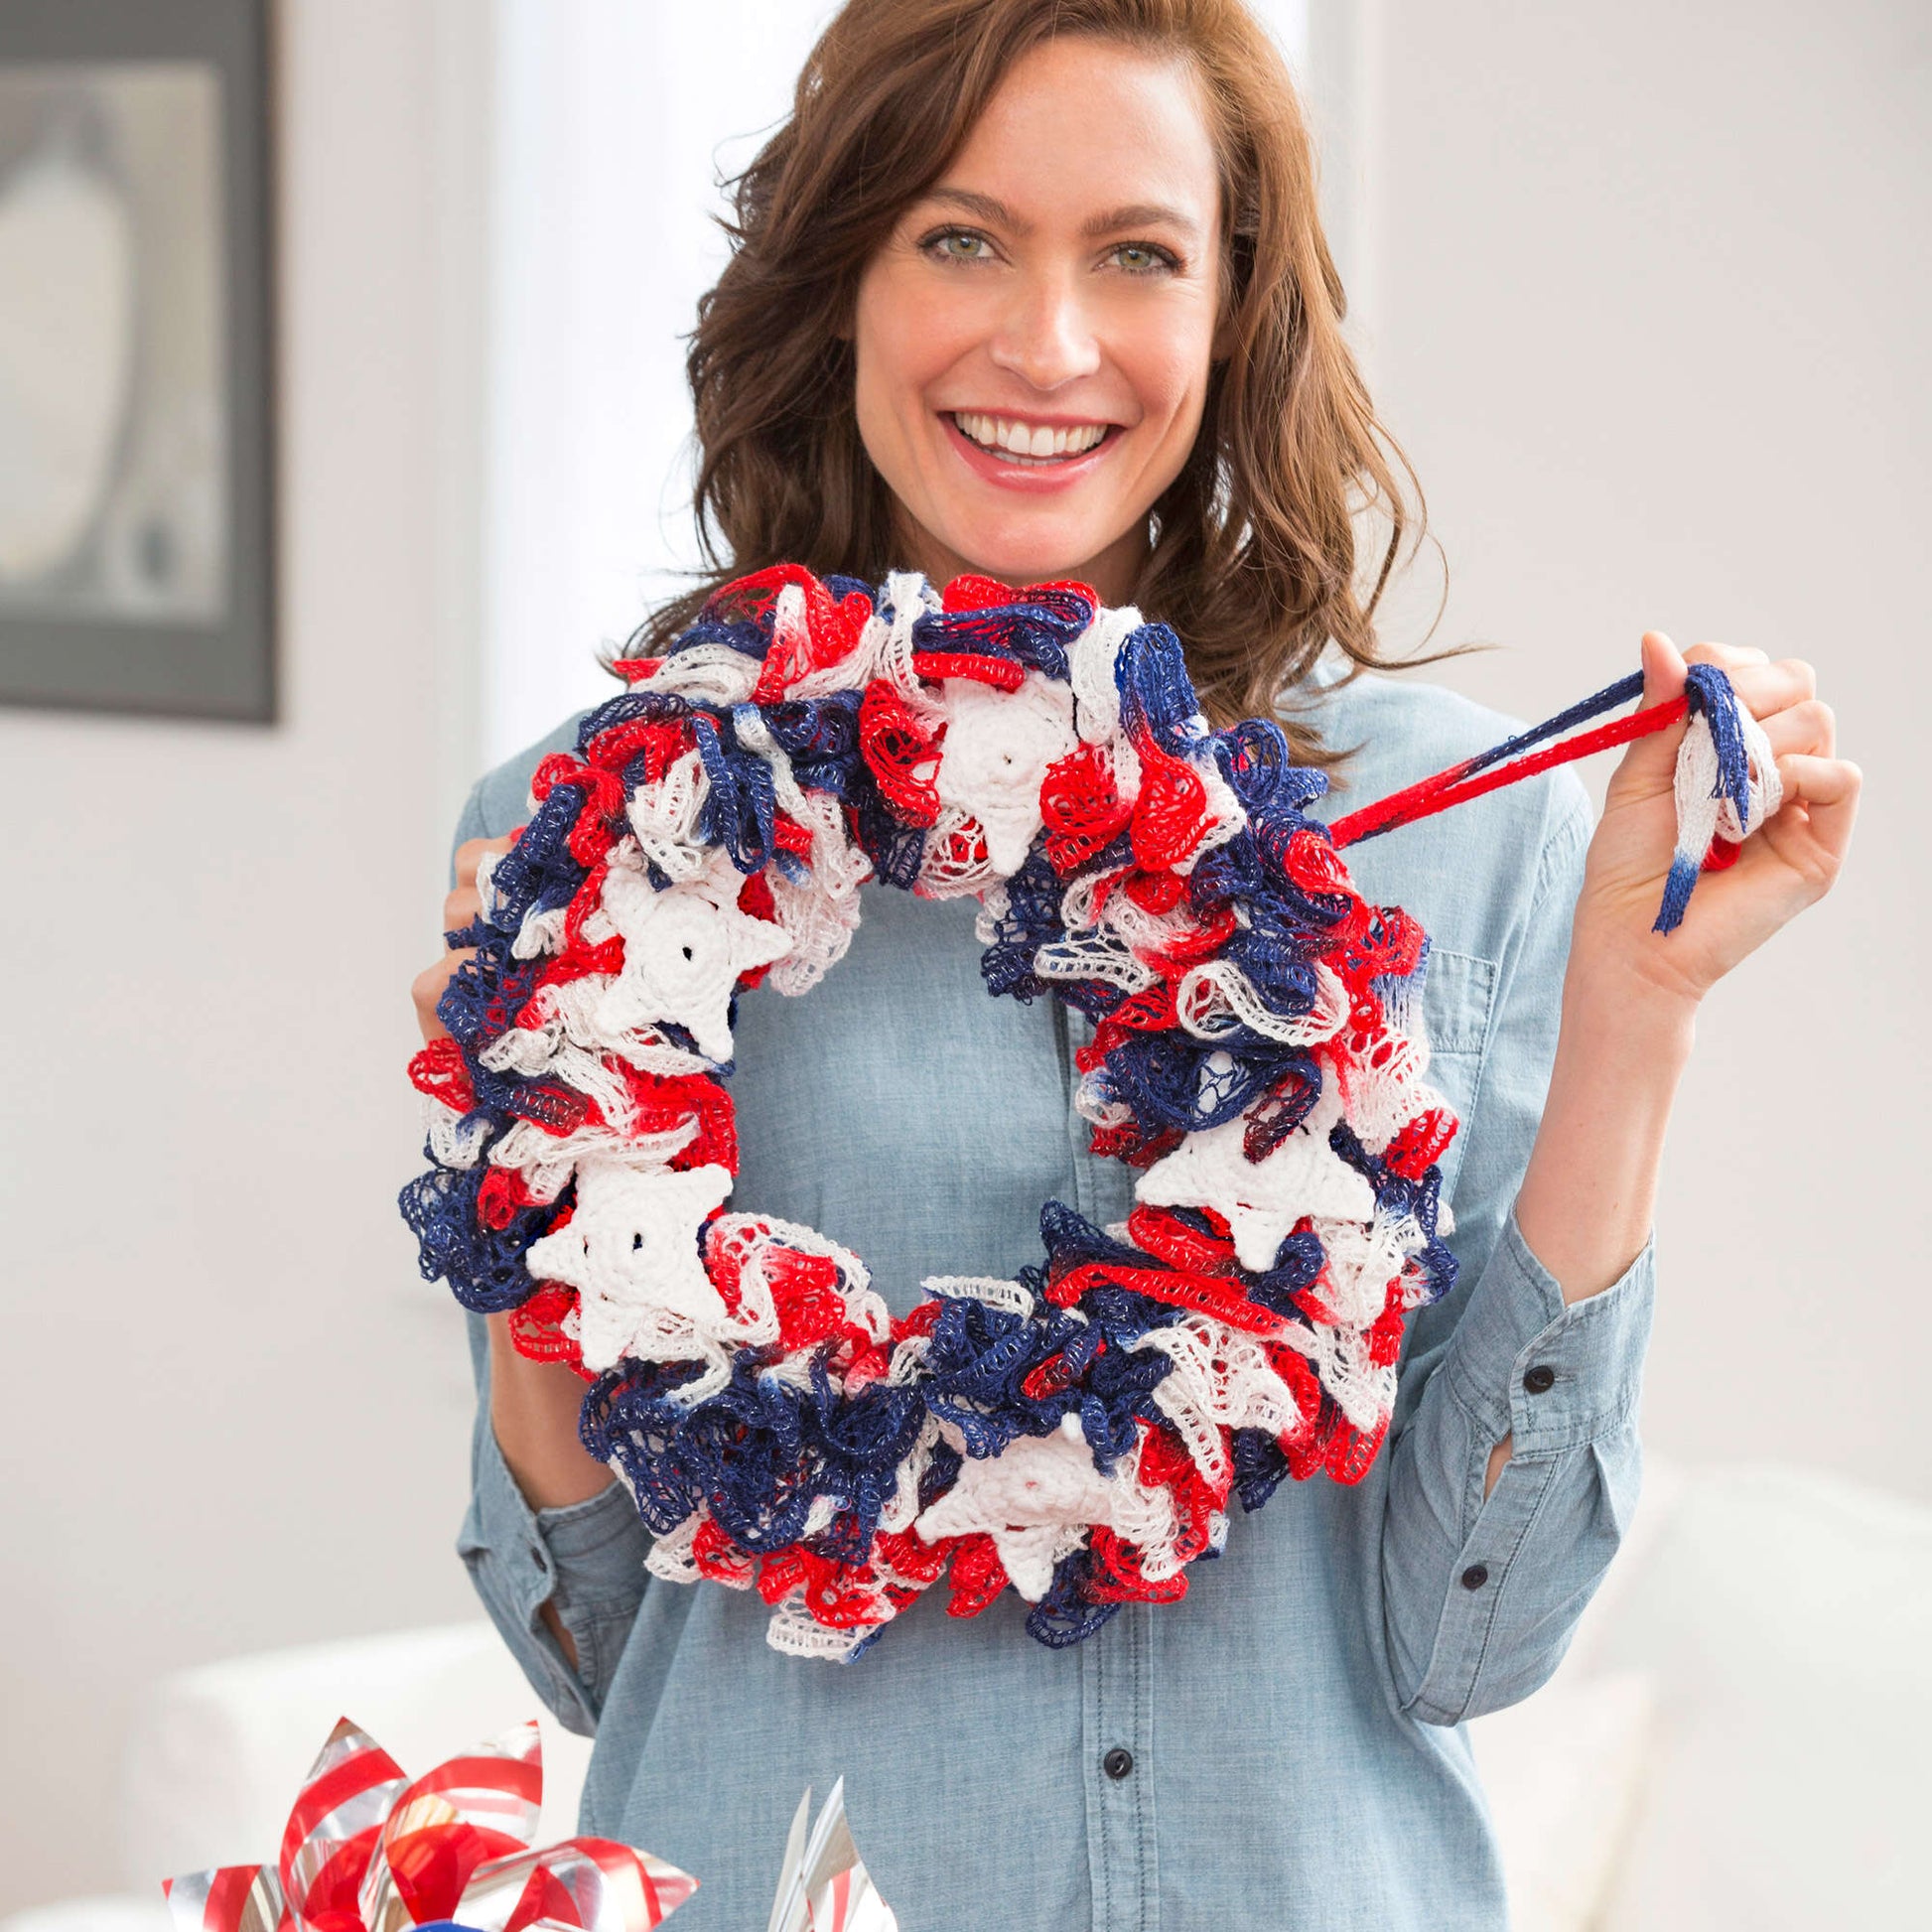 Free Red Heart Crochet Hang With Pride Wreath Pattern